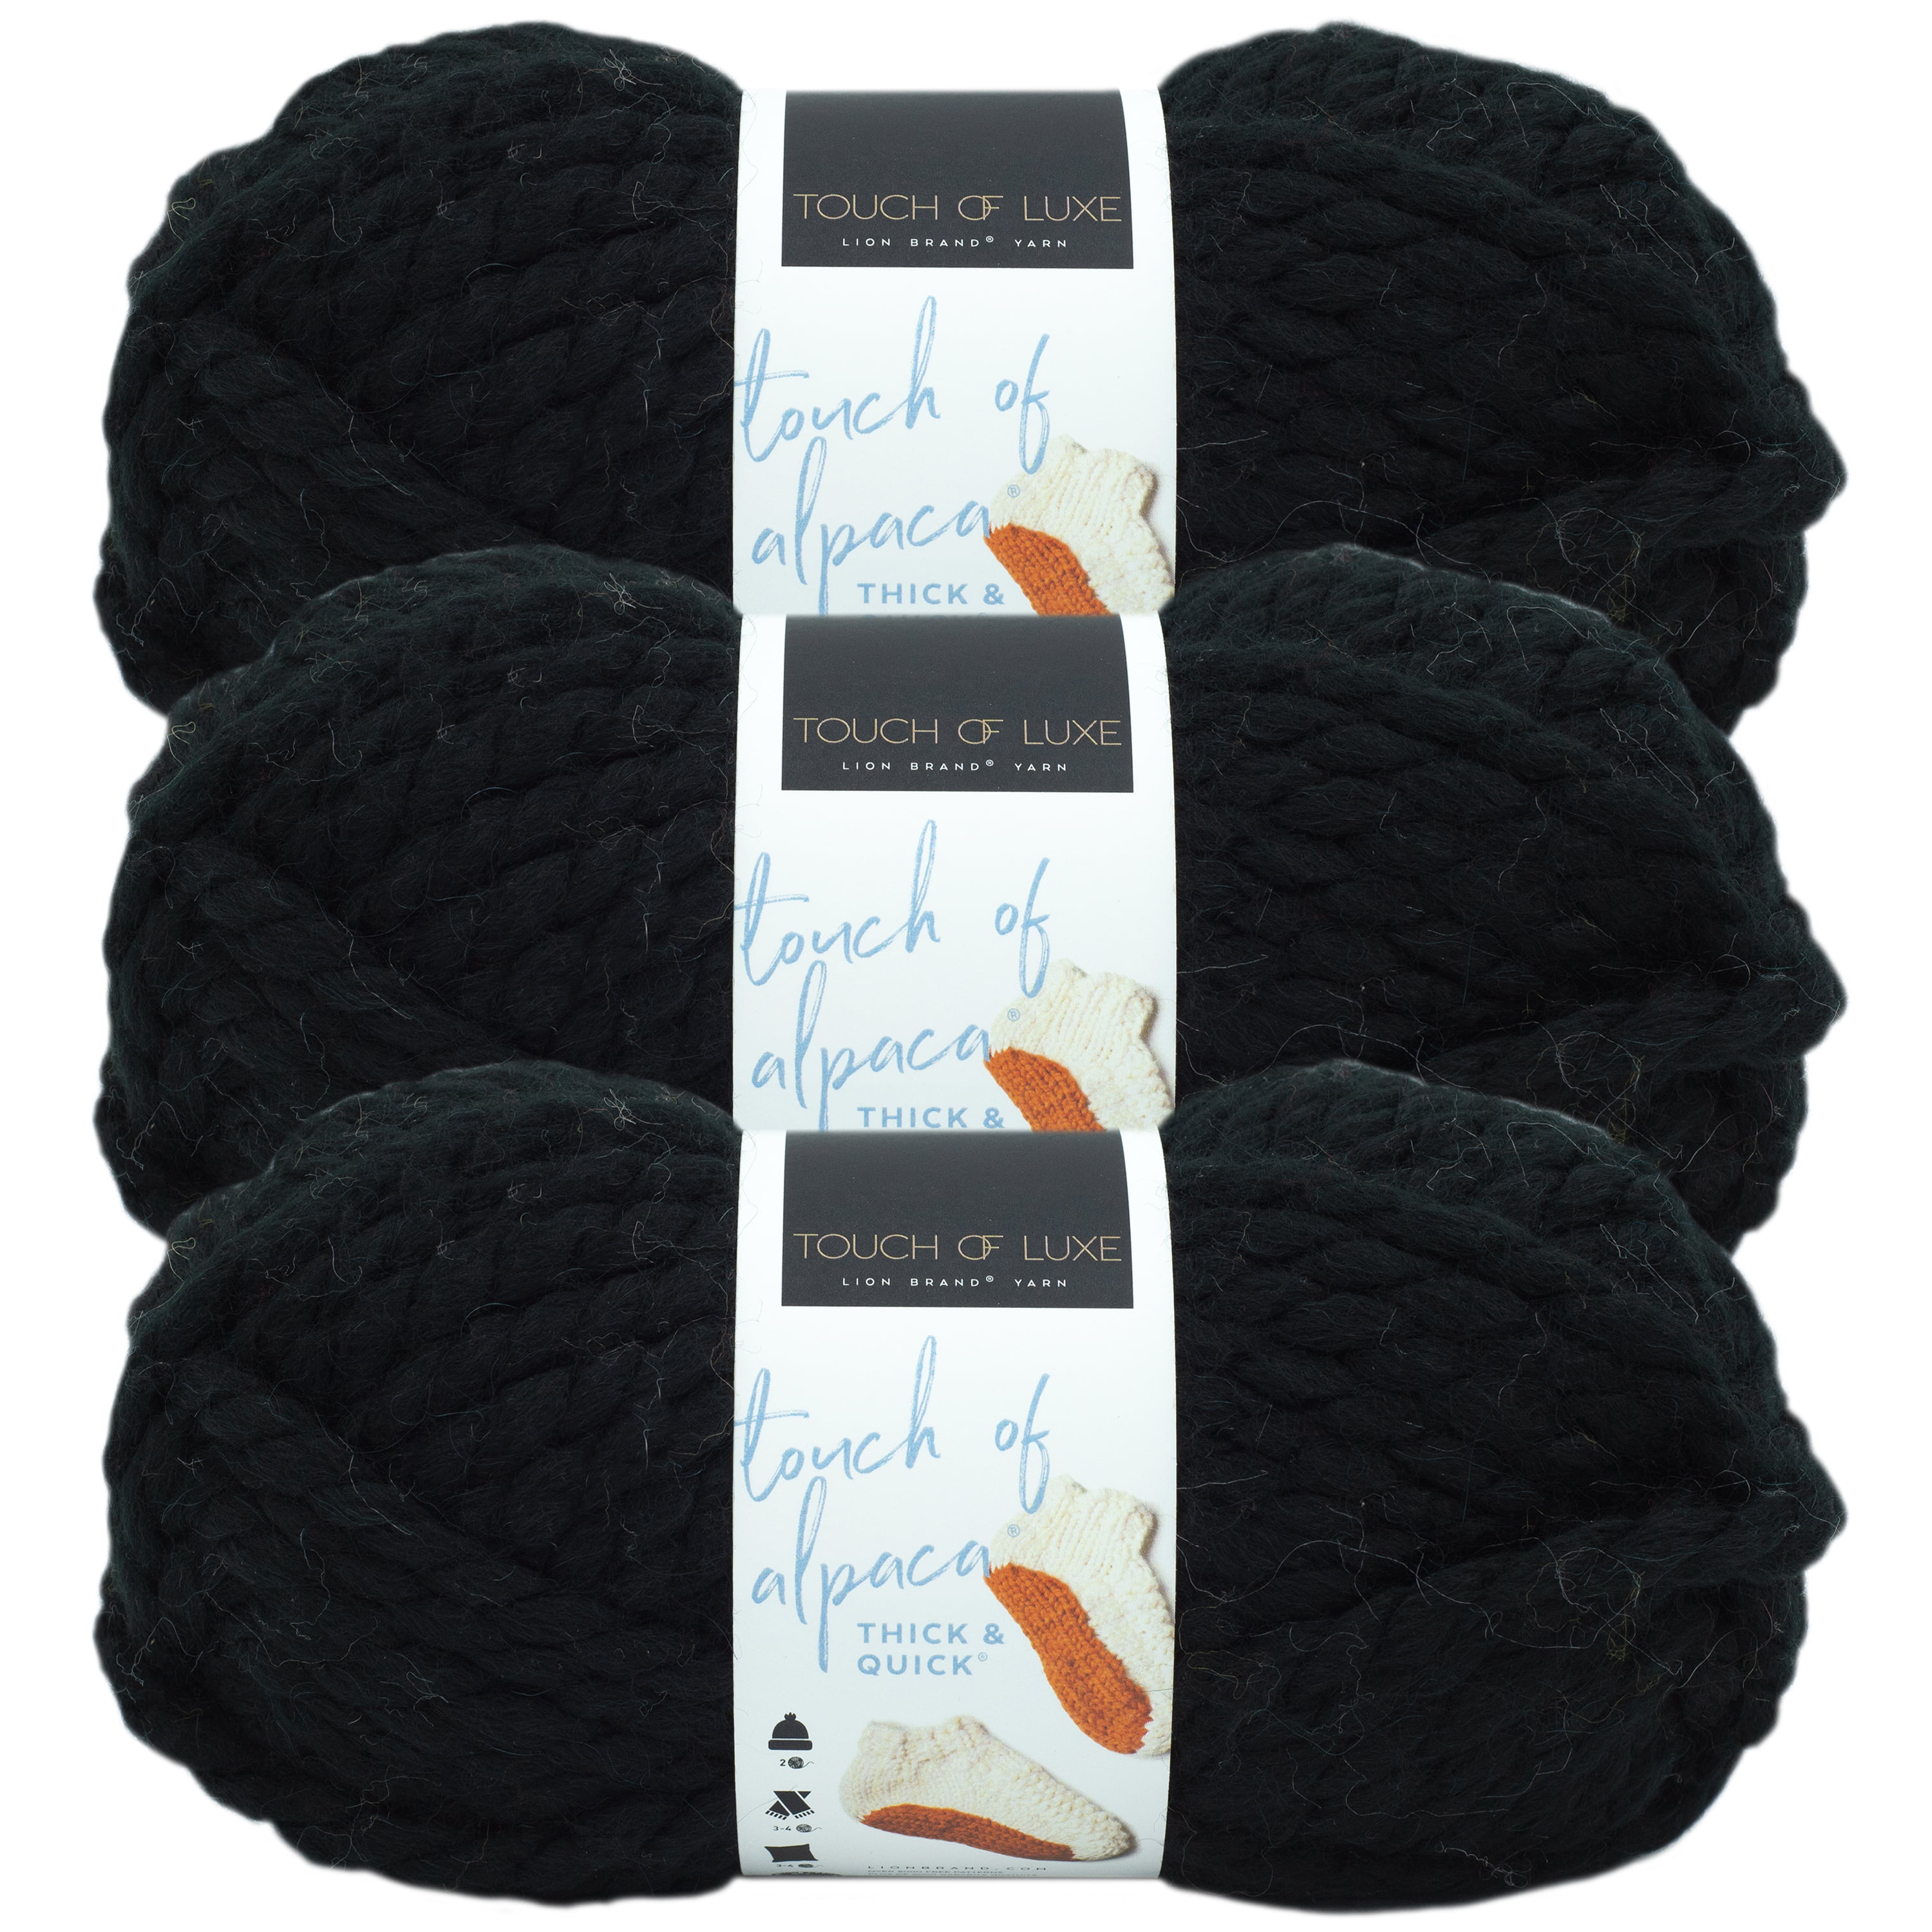  Lion Brand Yarn Touch of Alpaca Thick & Quick Yarn for  Knitting, Crocheting, and Crafting, 1 Pack, Aster